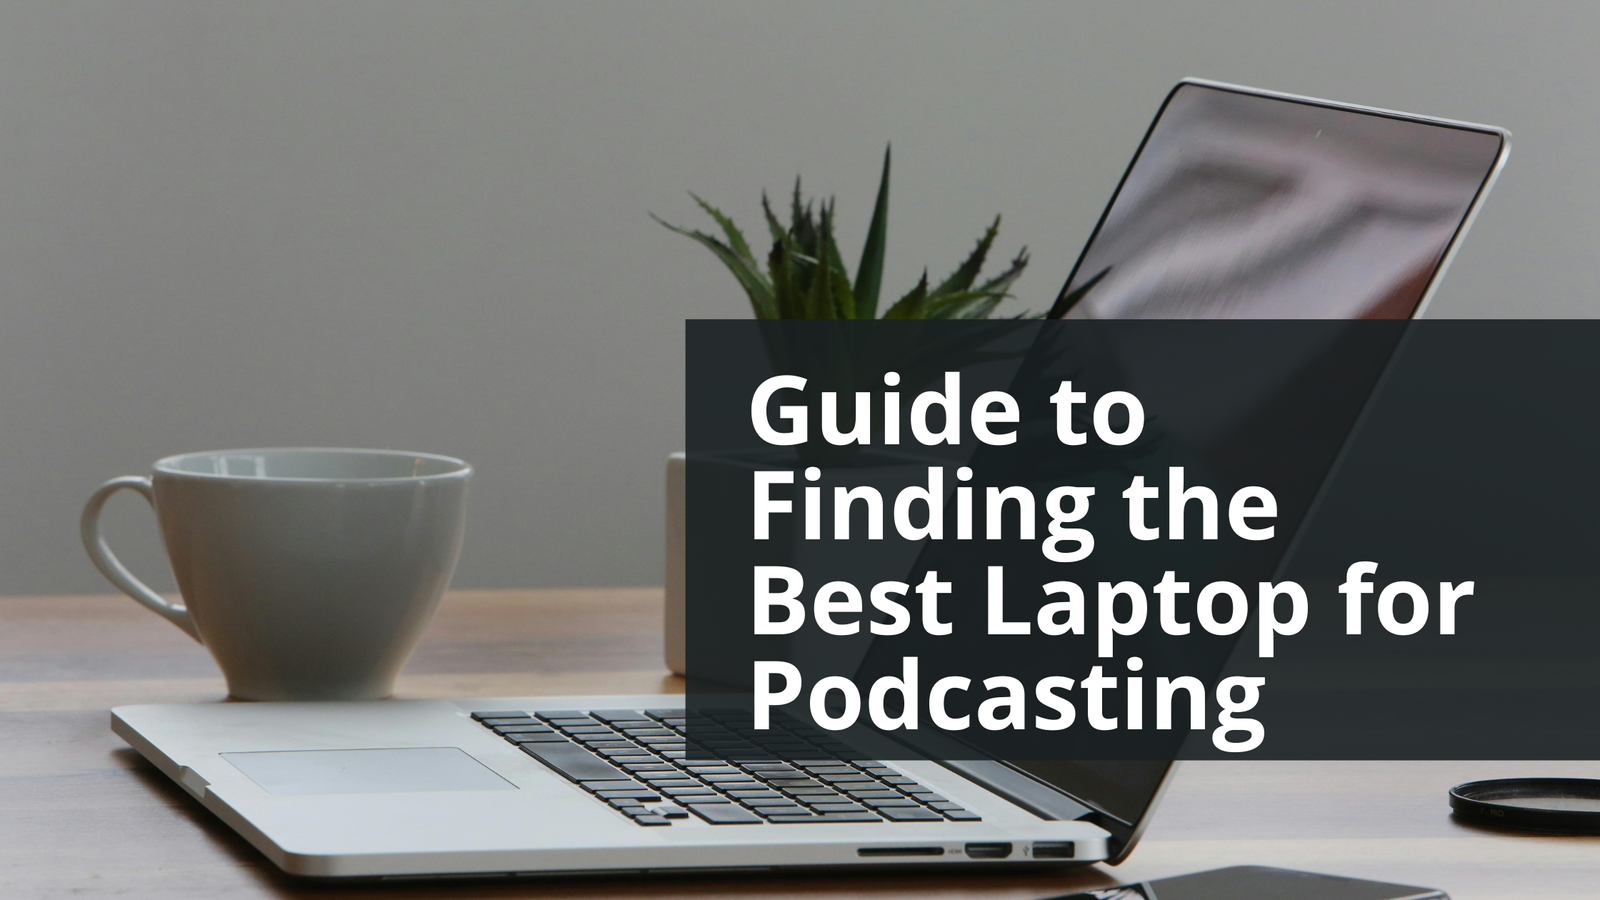 best laptop for podcasting